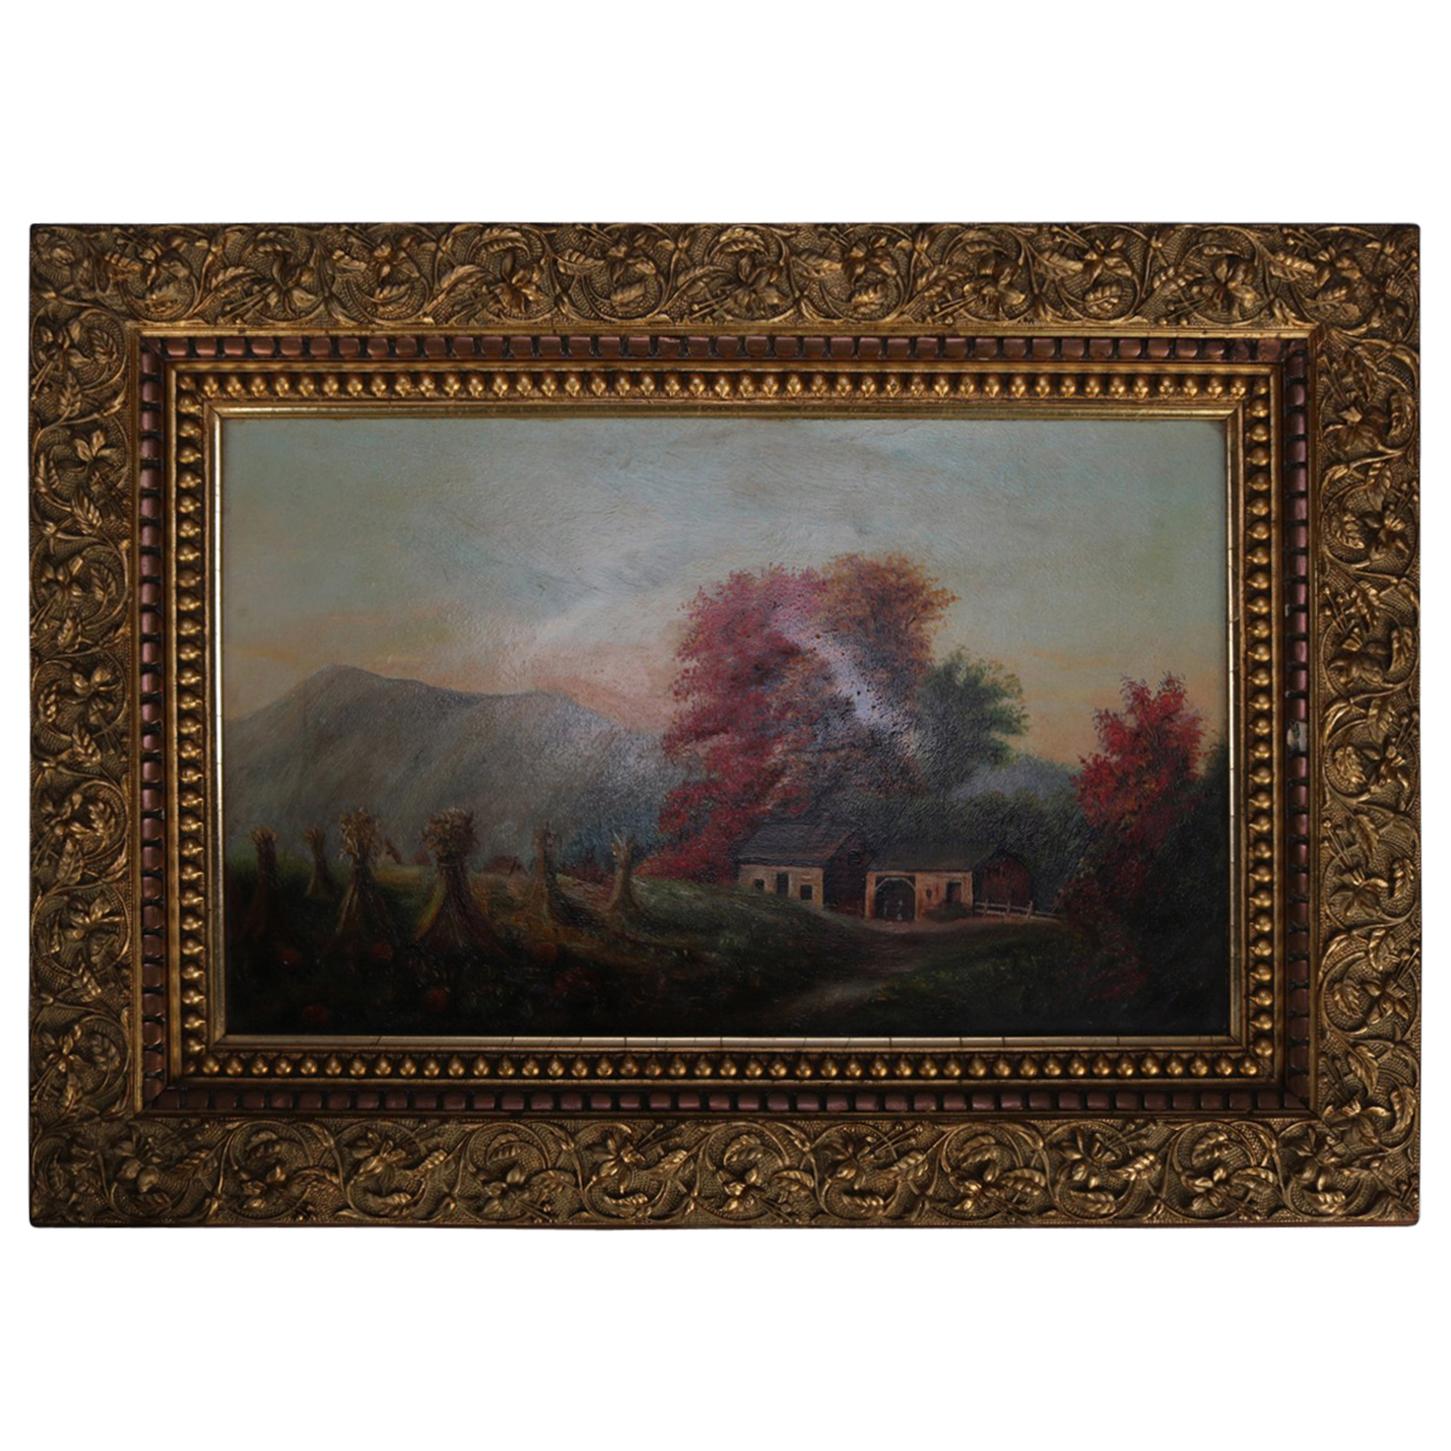 Antique Folk Art Oil on Board Landscape Painting with Farm, 20th Century